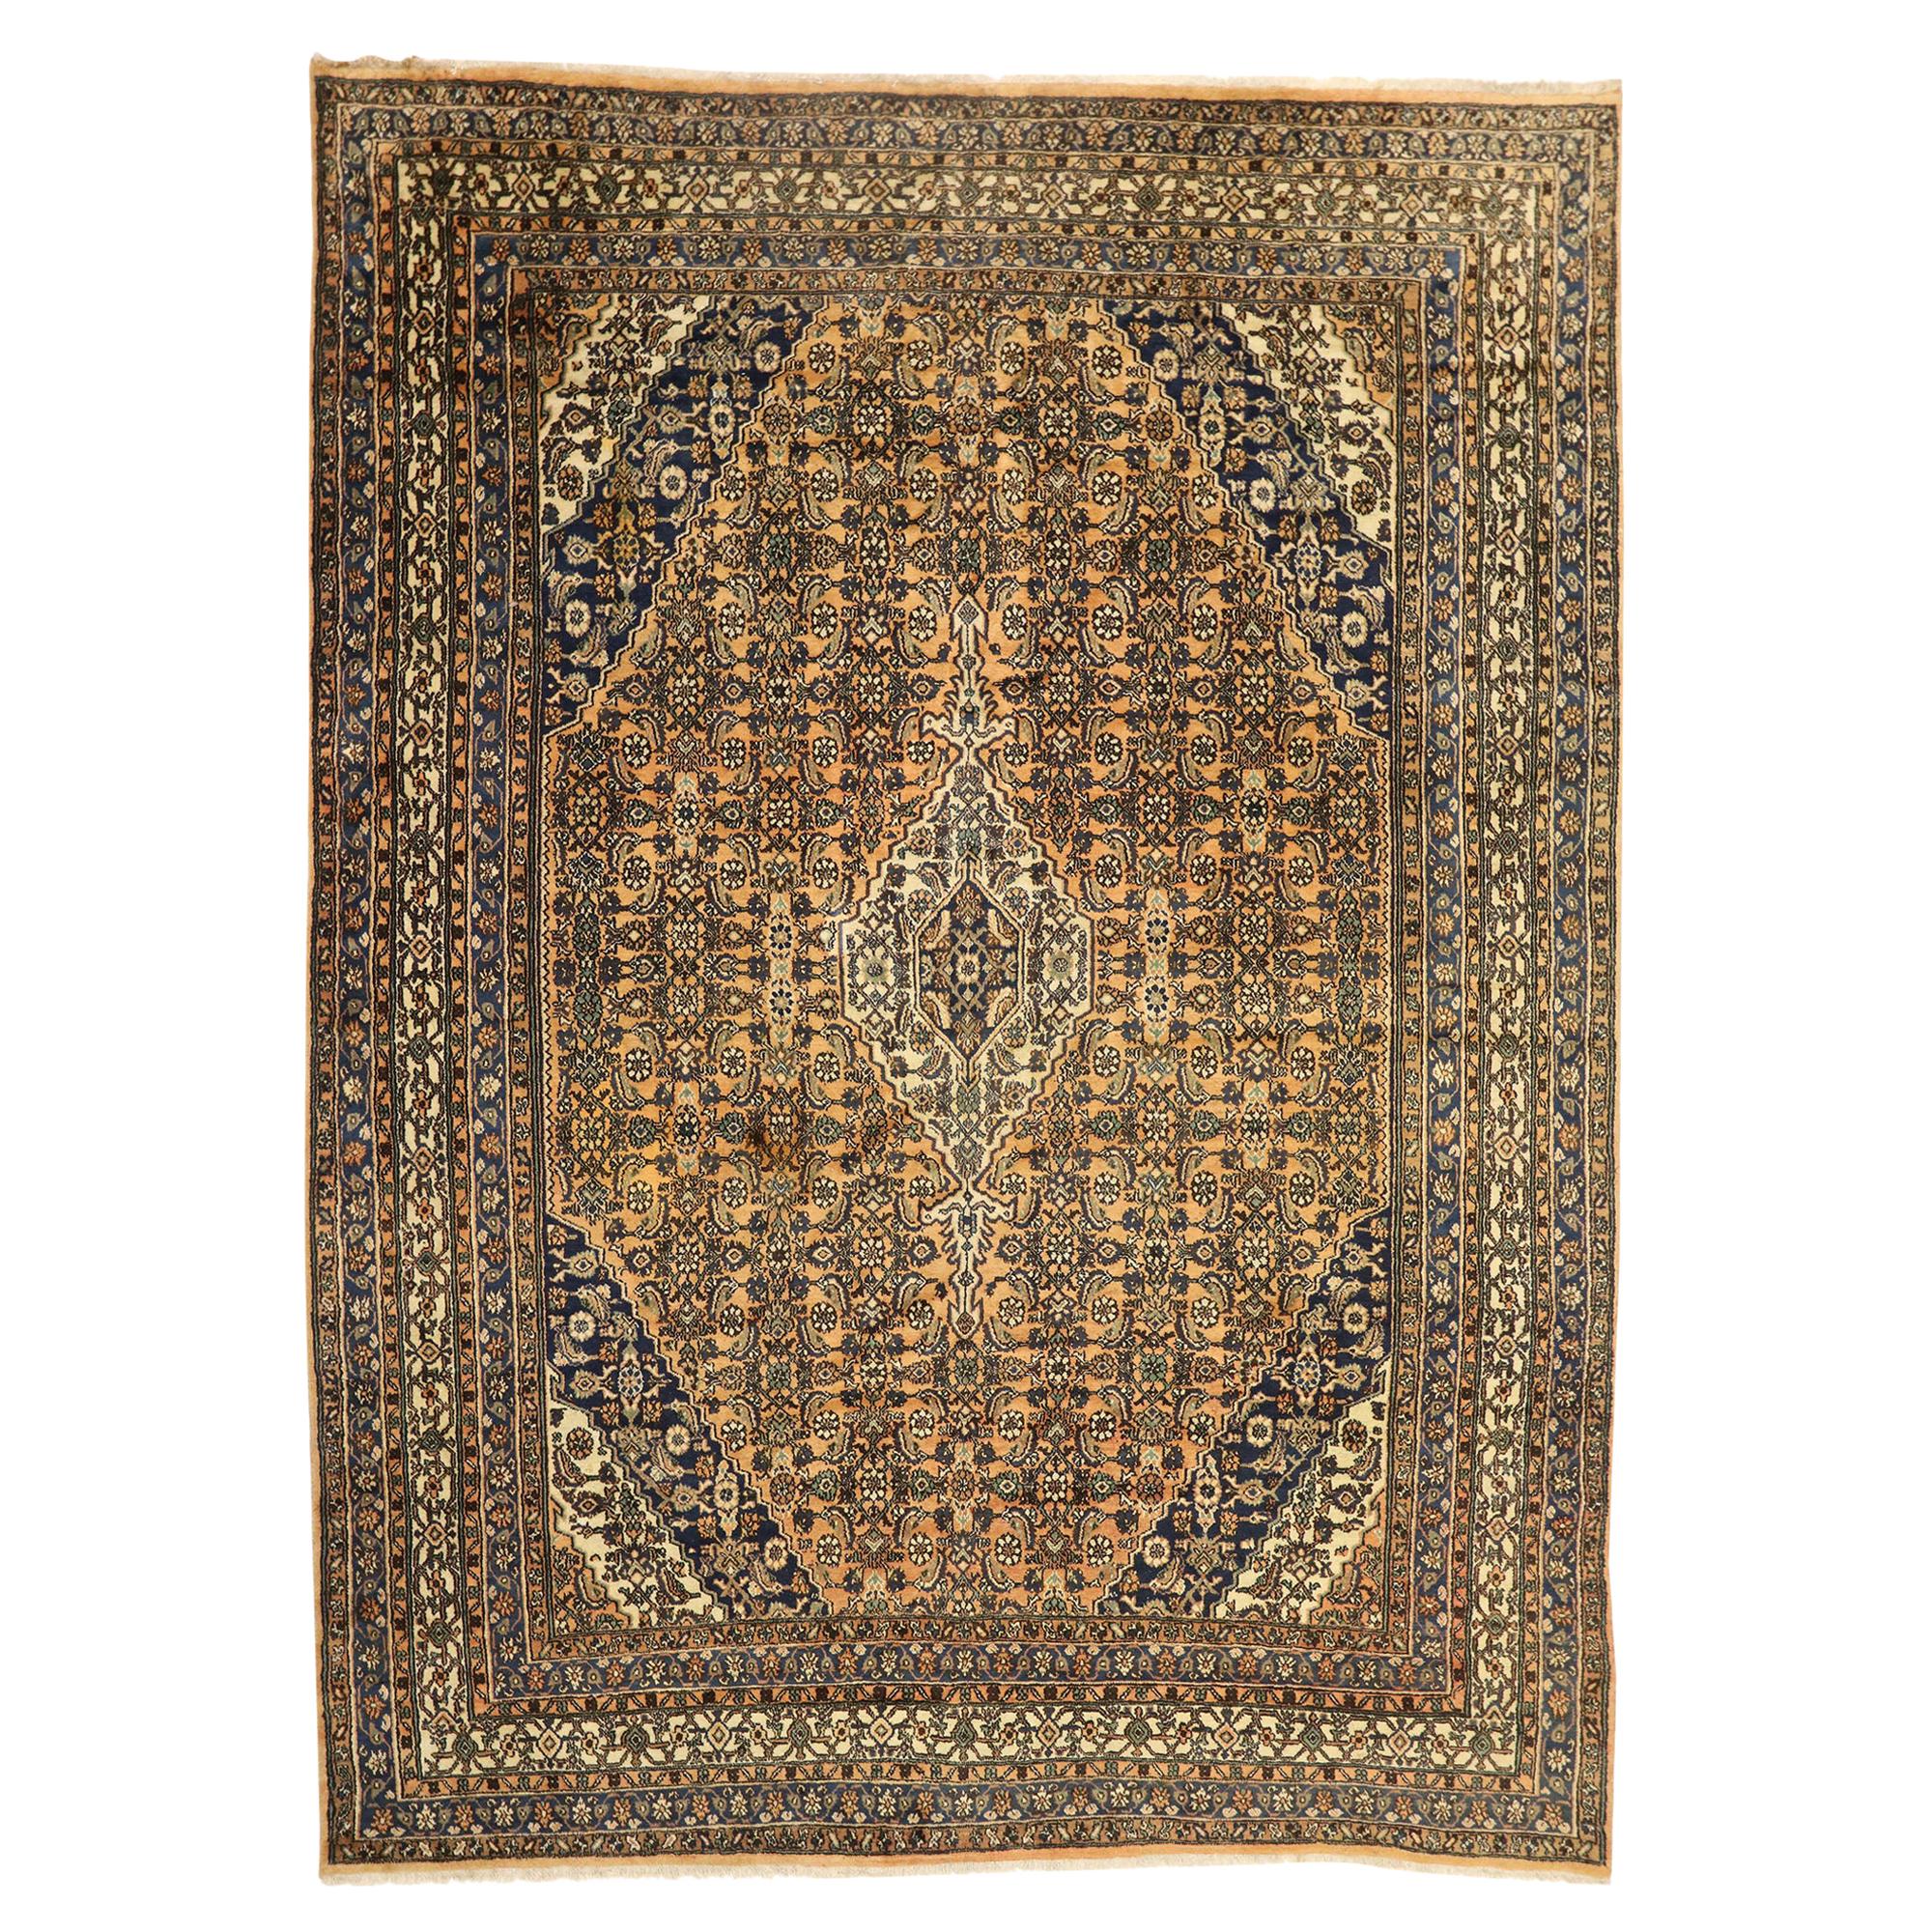 Vintage Persian Hamadan Area Rug with Mediterranean Rustic Tuscan Style For Sale